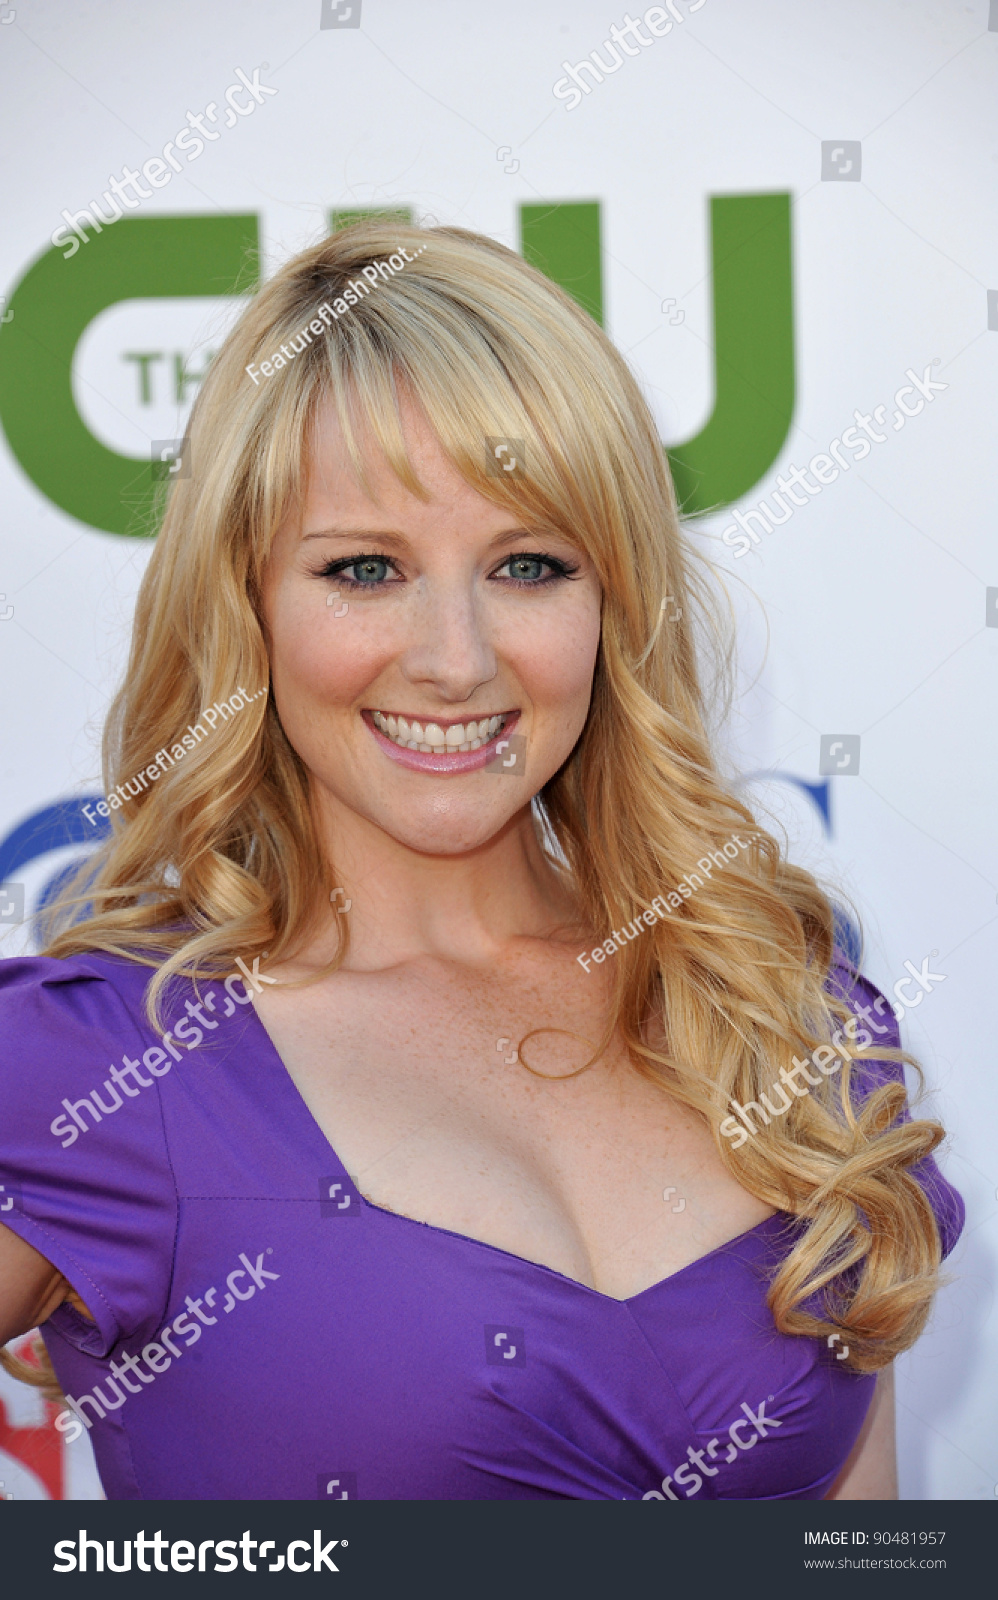 bria clark recommends f that melissa rauch pic